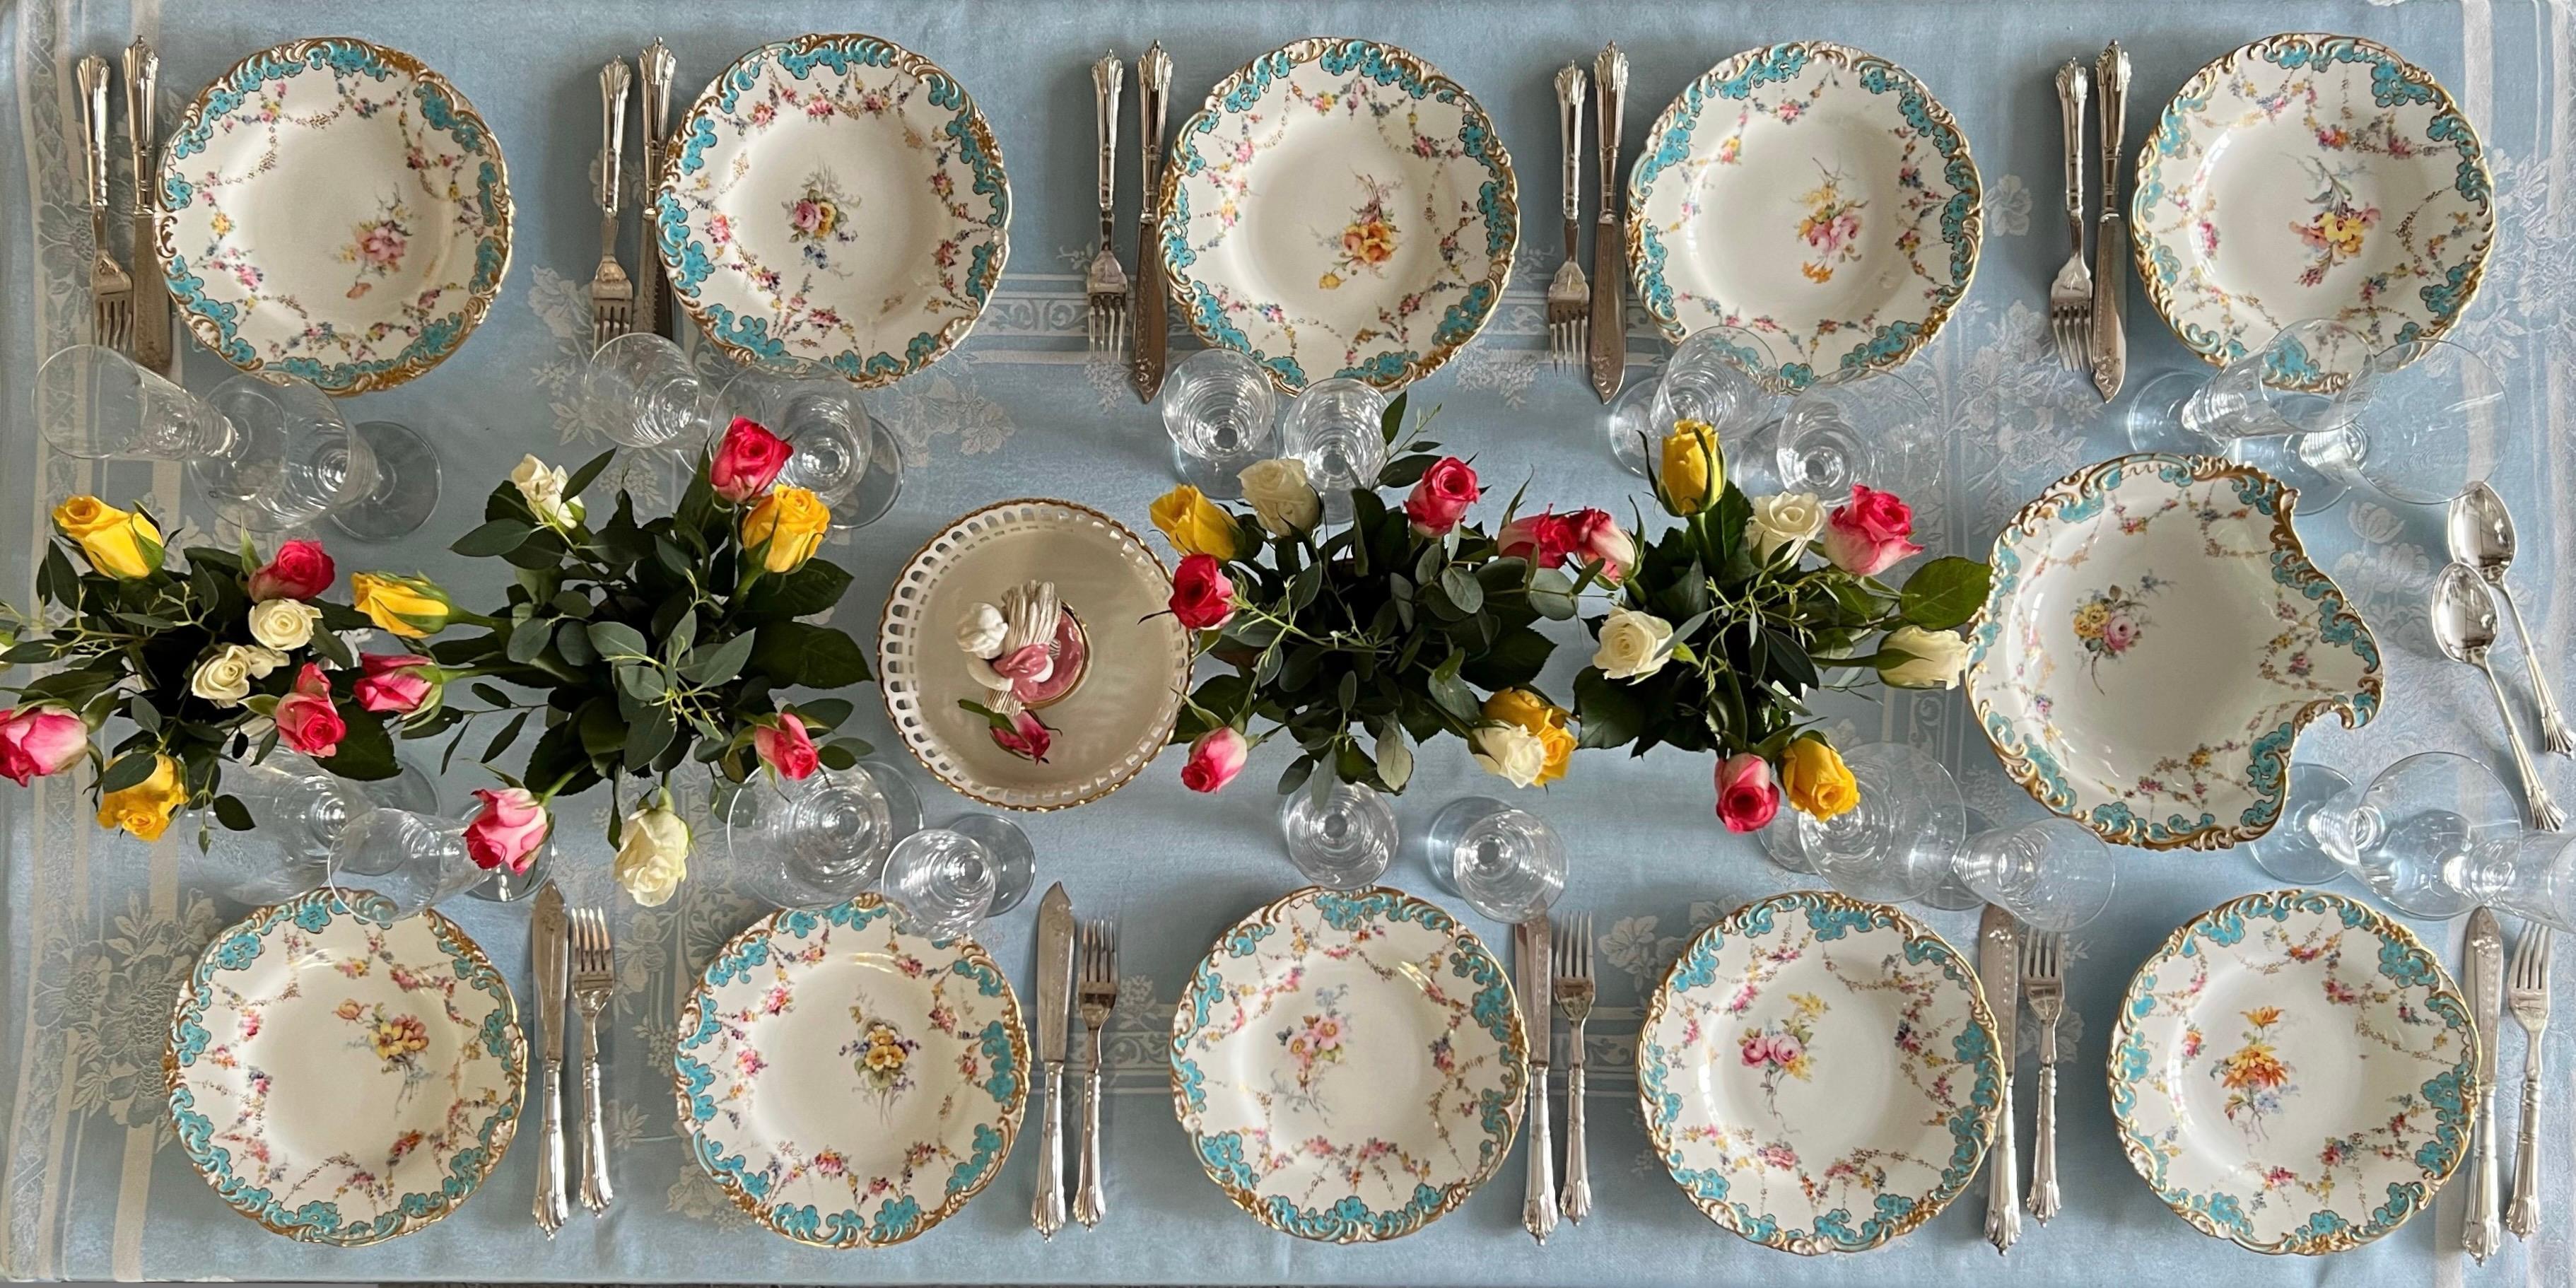 This is a beautiful part dessert service made by Royal Crown Derby in 1916. The service consists of one serving dish and ten plates, and is decorated with beautiful scalloped rims in turquoise and gilt, delicate flower garlands and a very find